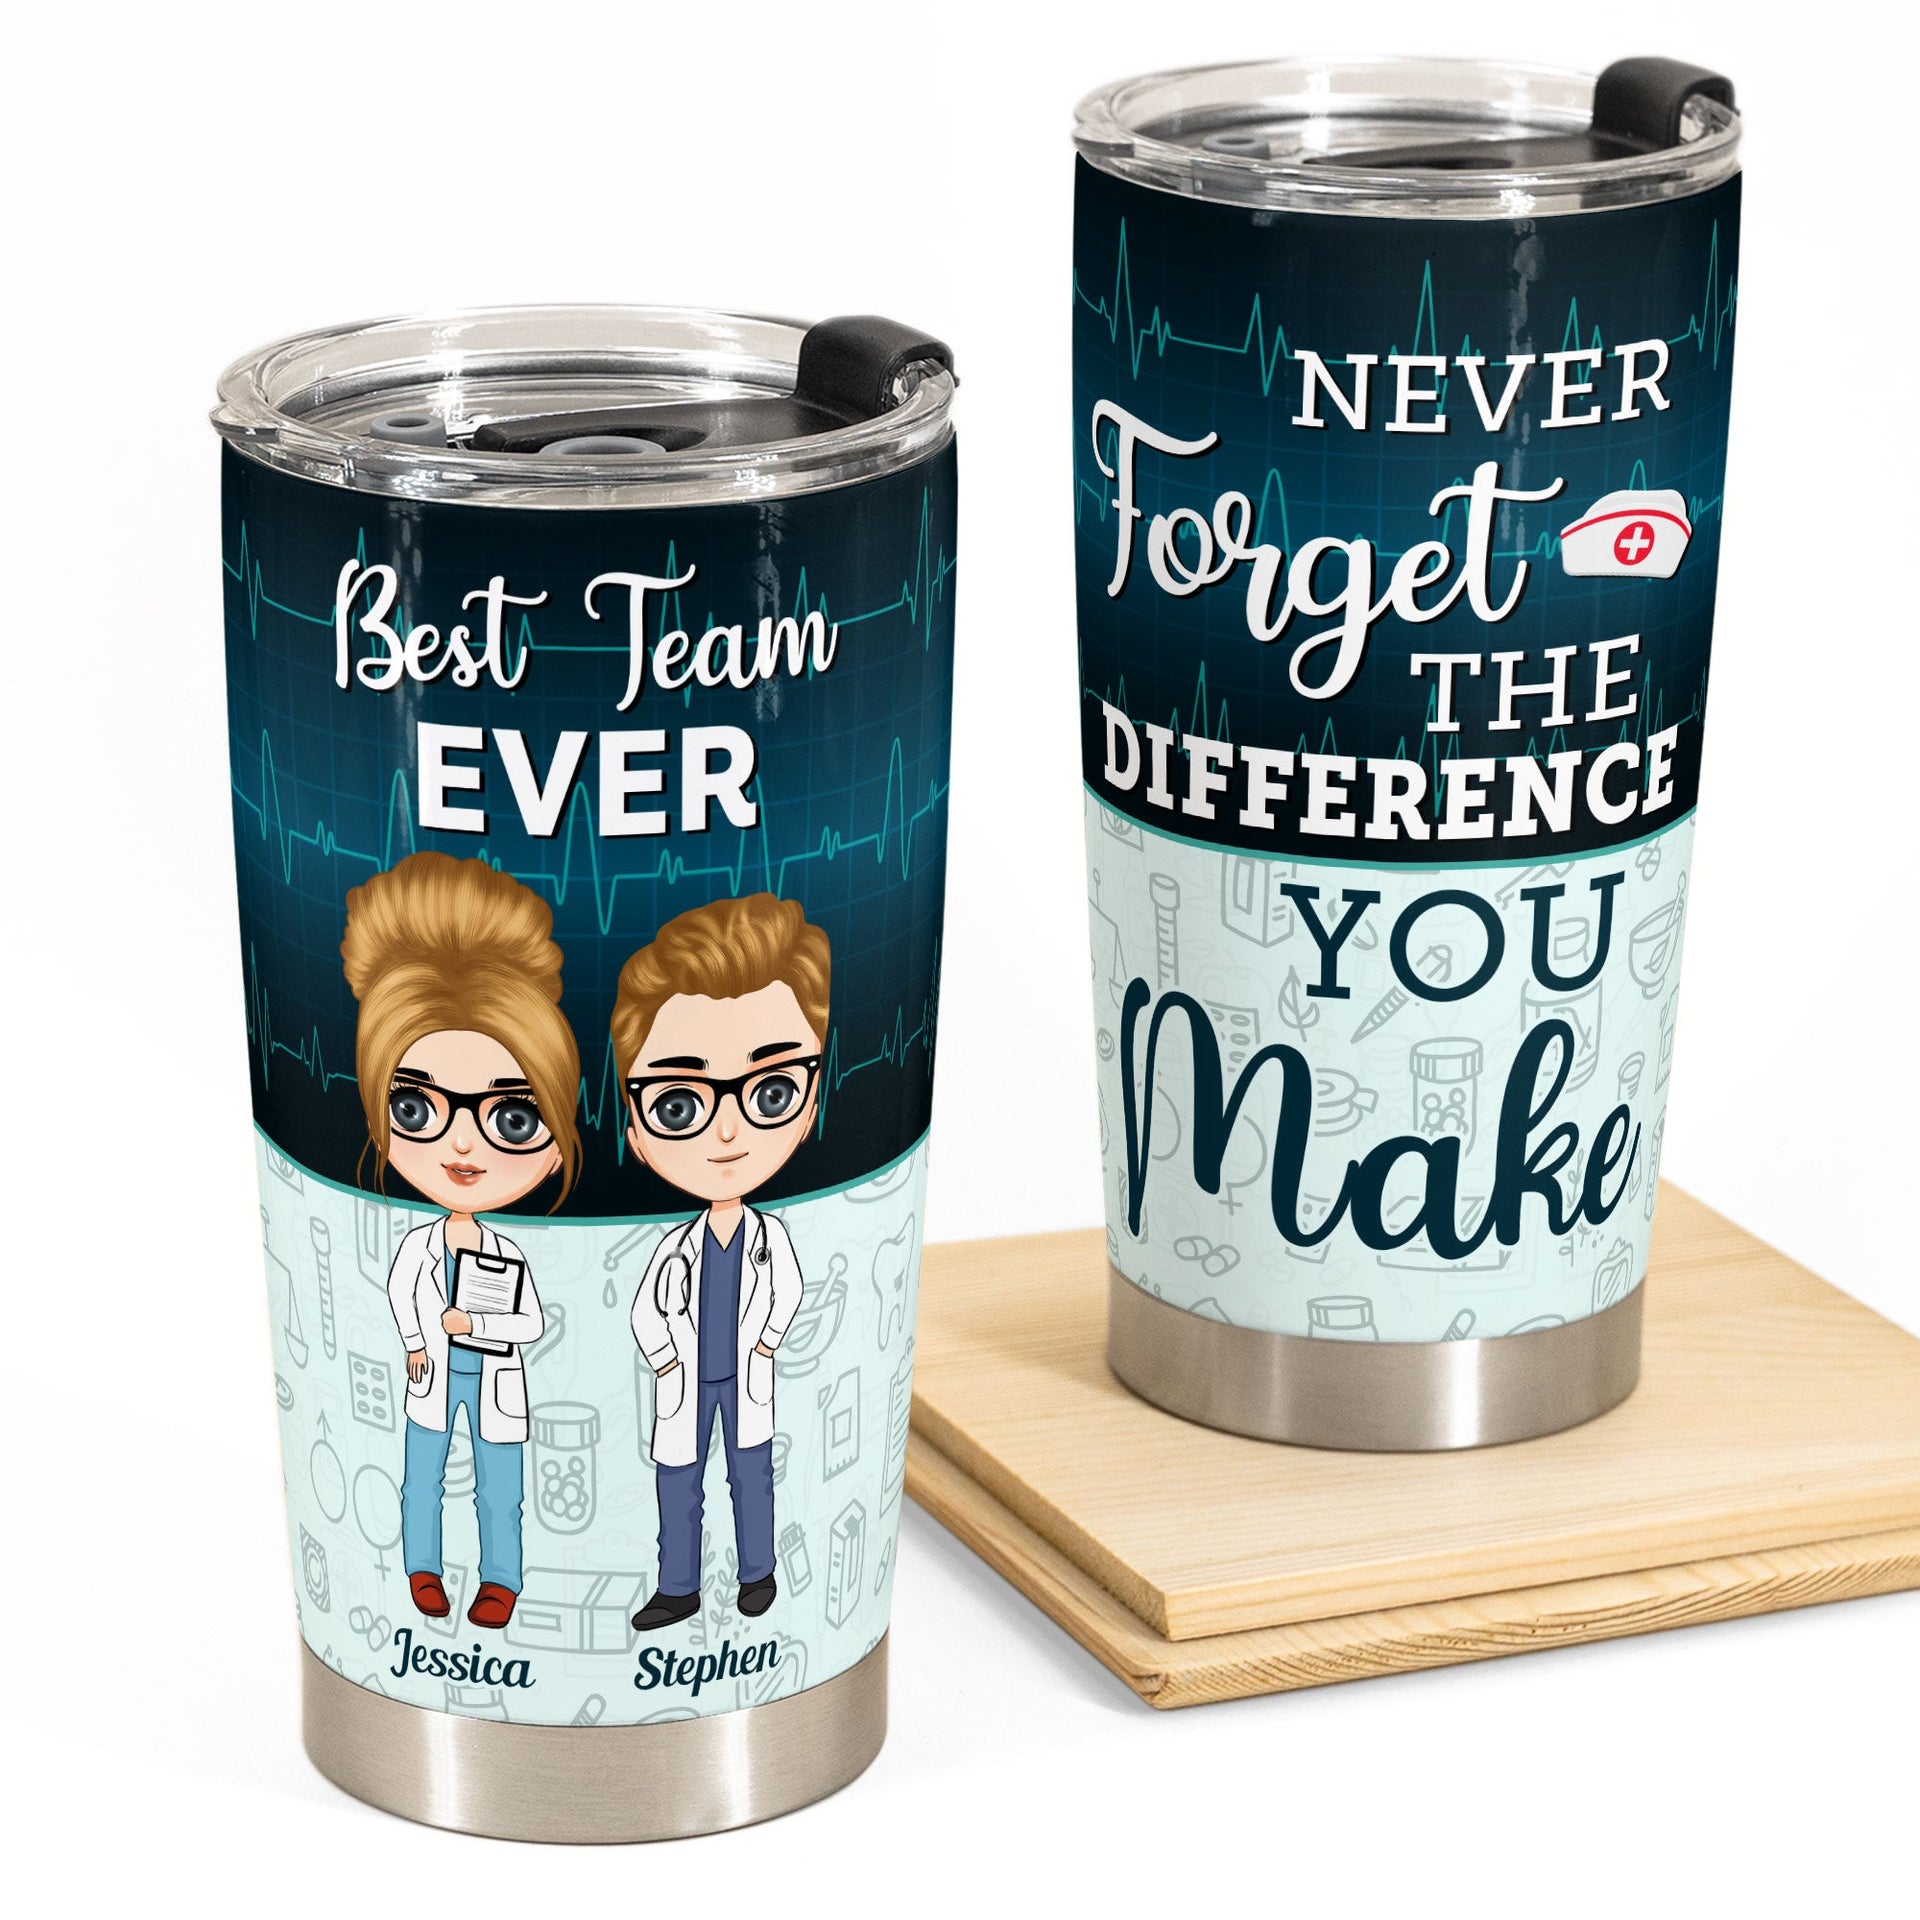 Never Forget The Difference You Make - Personalized Tumbler Cup